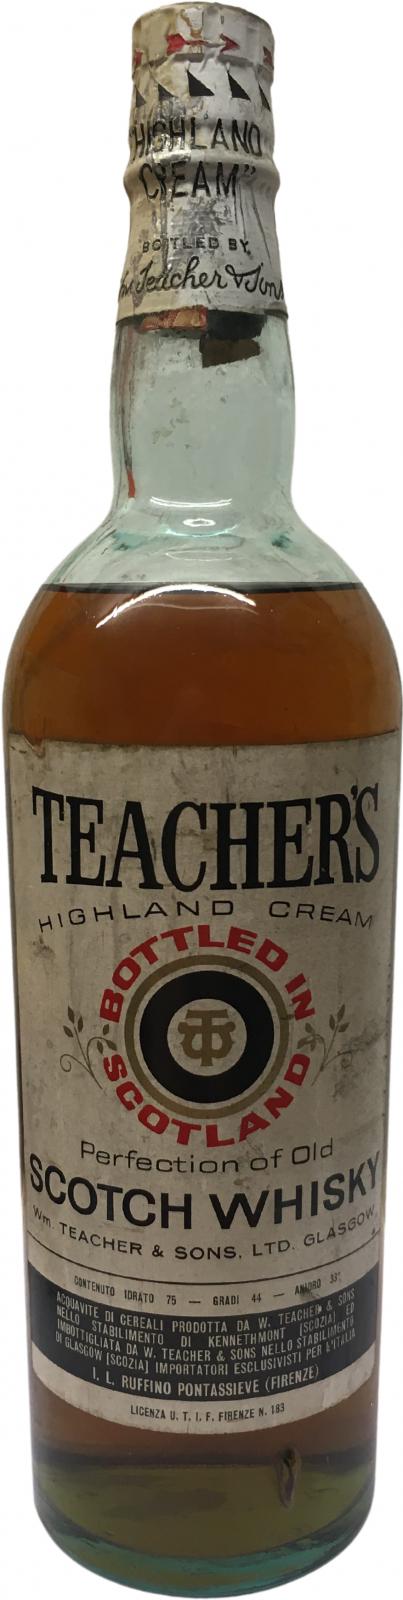 Teacher's Highland Cream Perfection of Old Blended Scotch Whisky I.L. RuffinoPontassieve 44% 750ml